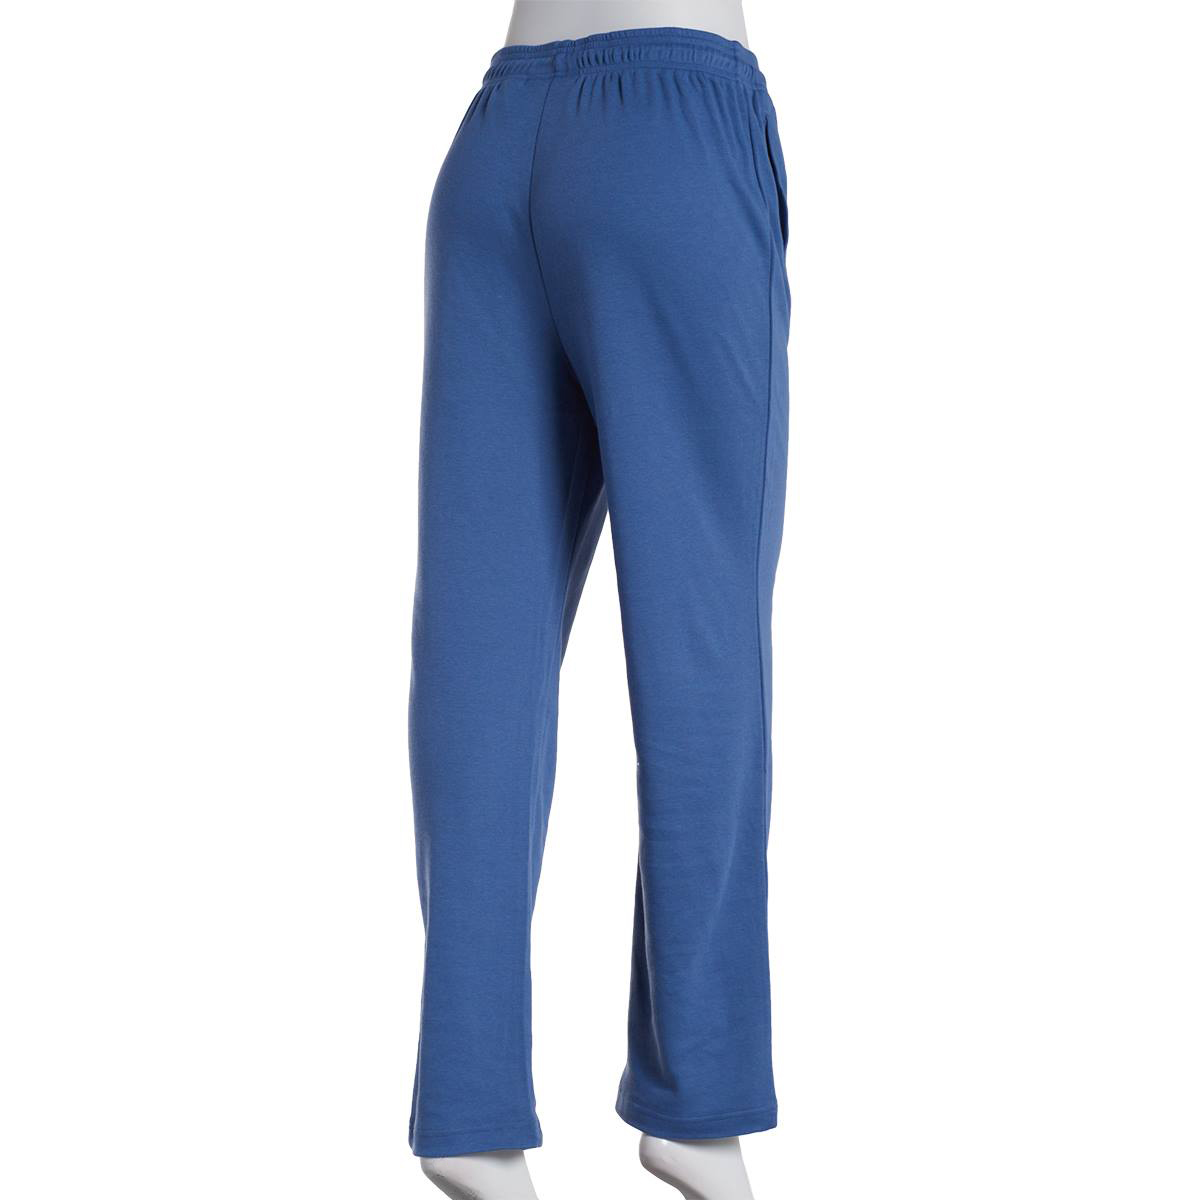 Womens Hasting & Smith Average Knit Casual Pants